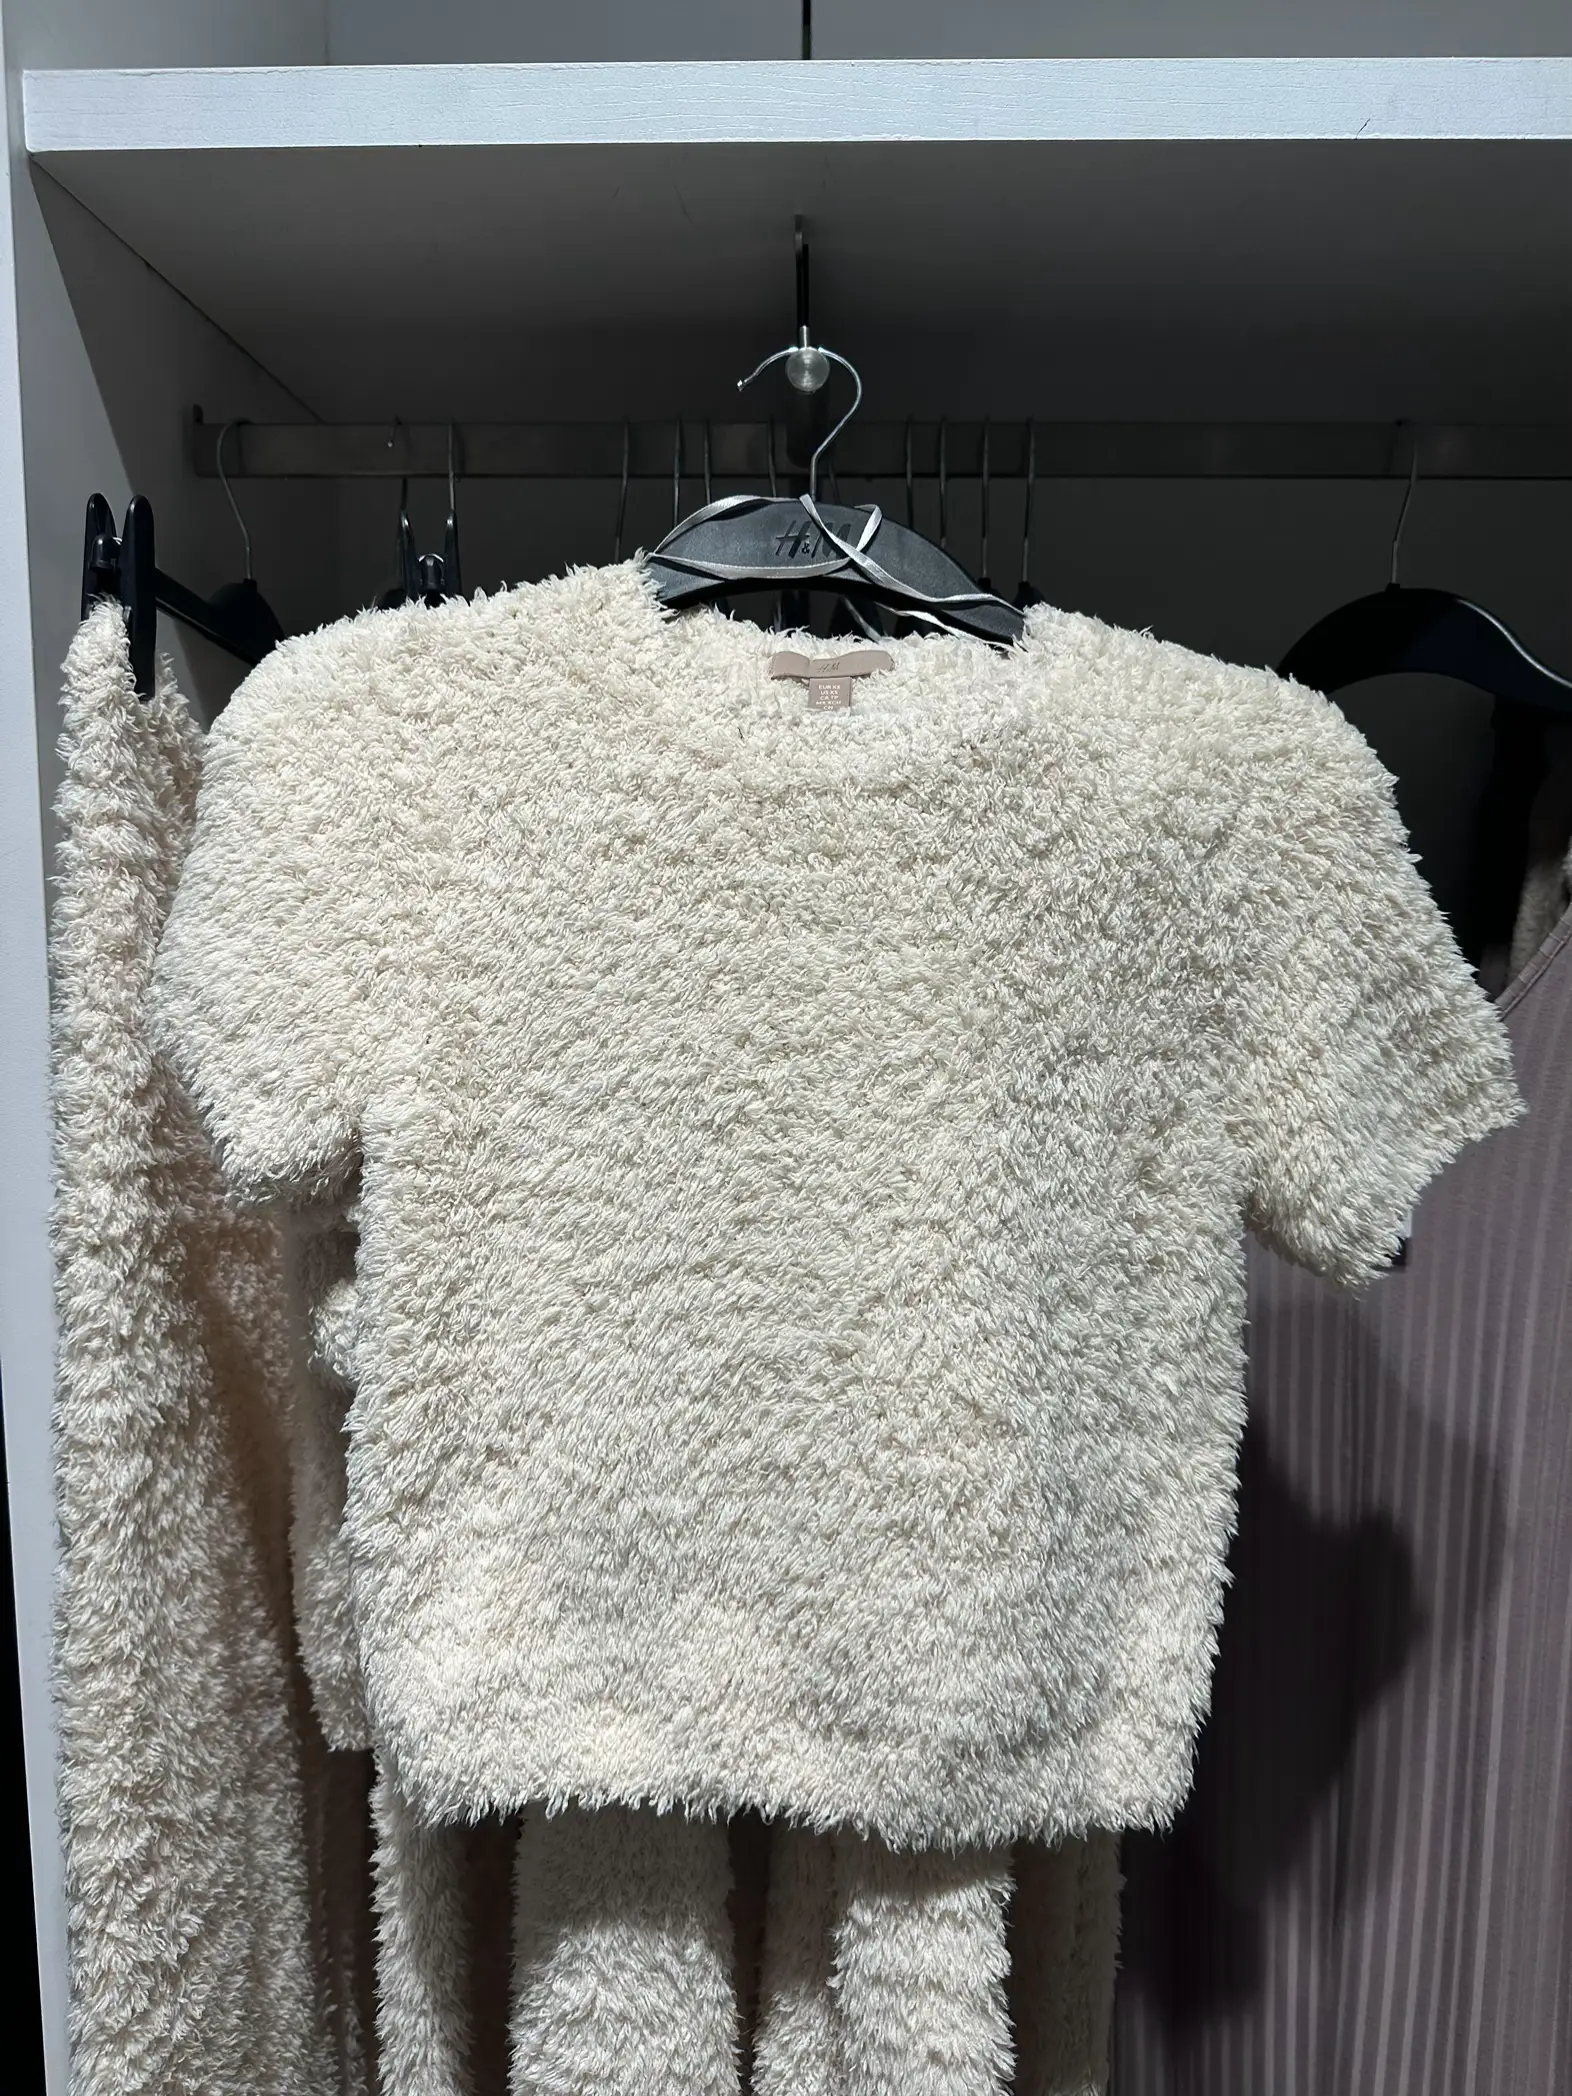 SKIMS Cozy Collection Dupes at H&M 